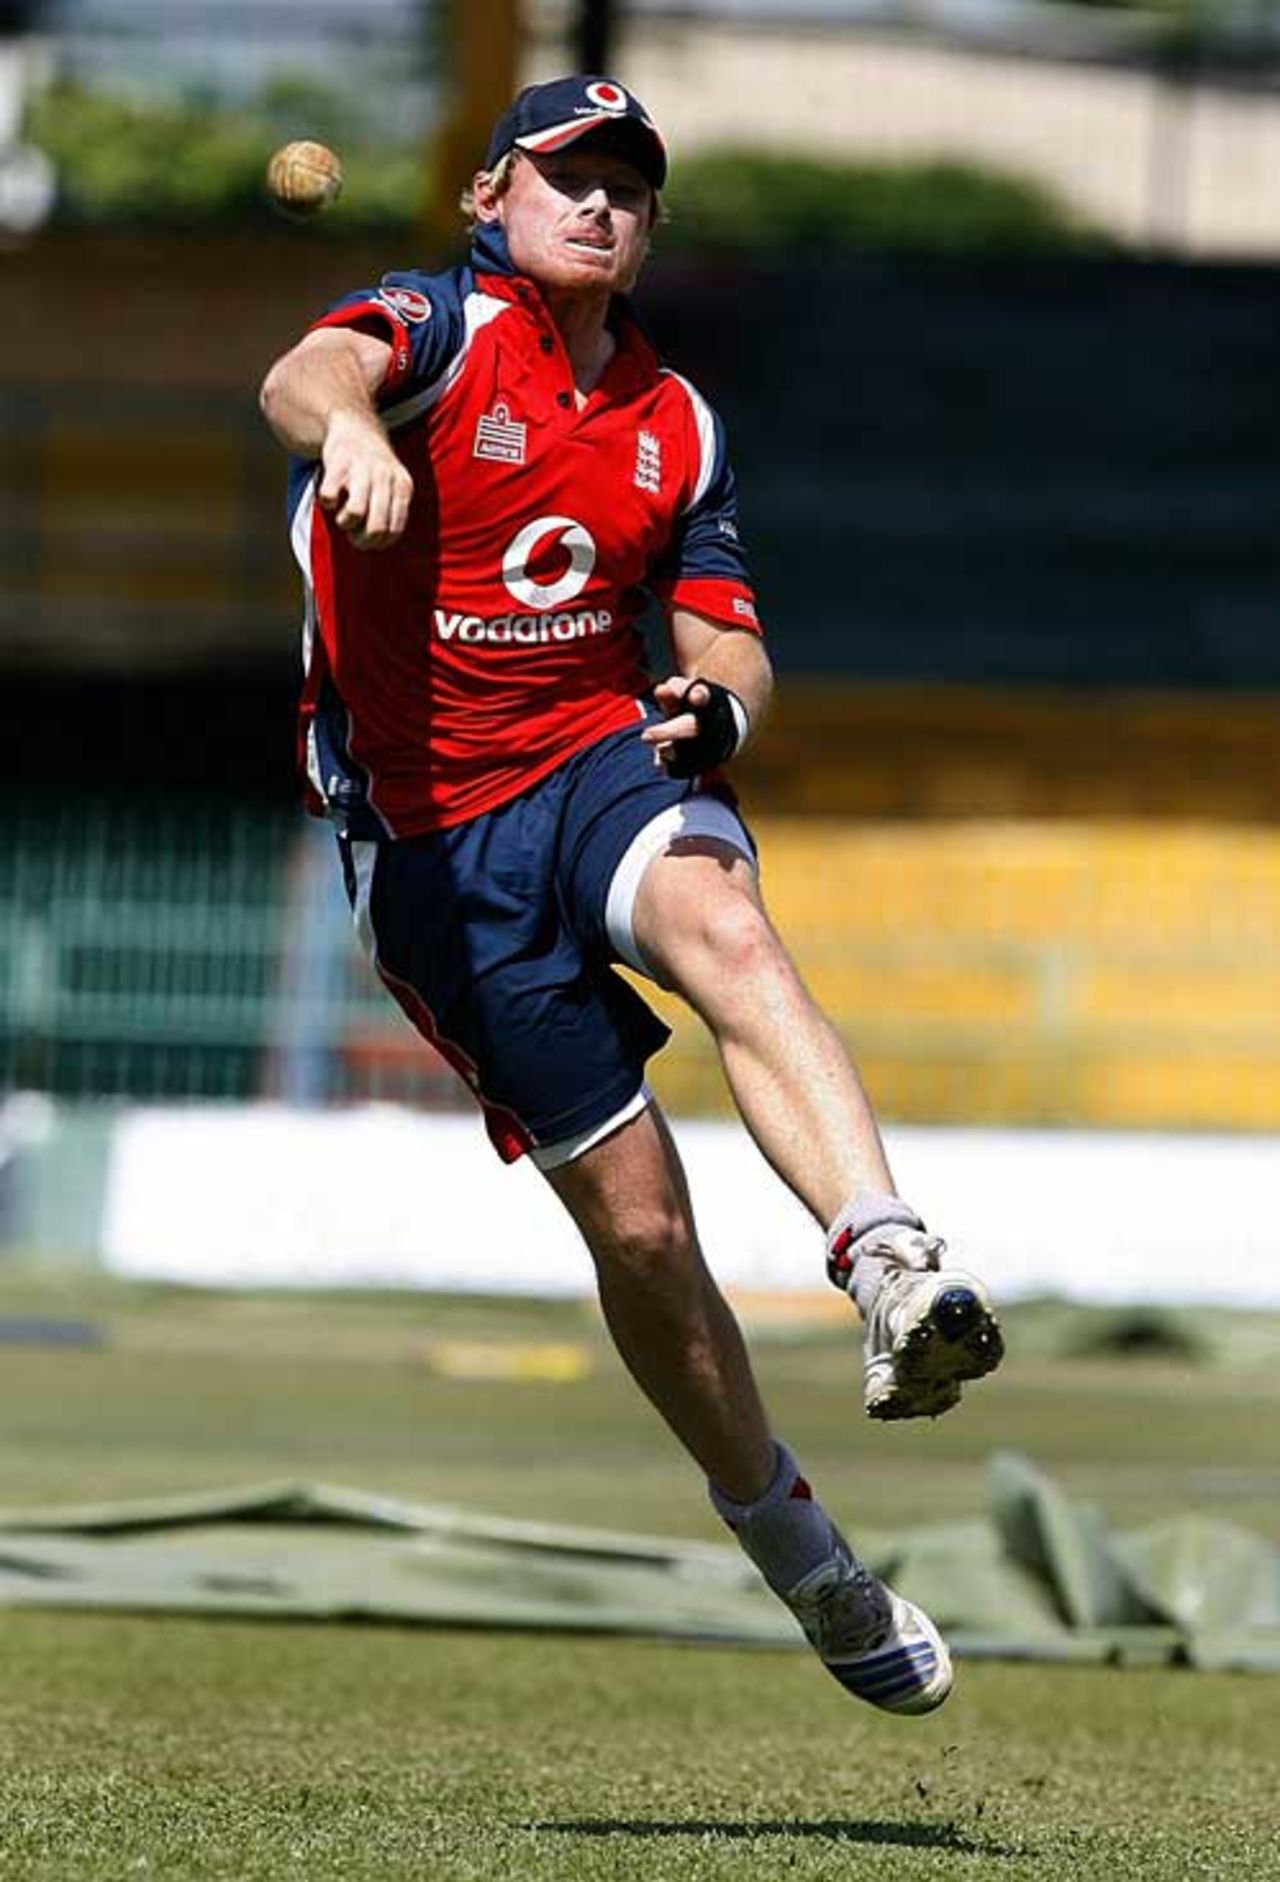 Ian Bell takes aim during England's fielding drills, Colombo, October 9, 2007